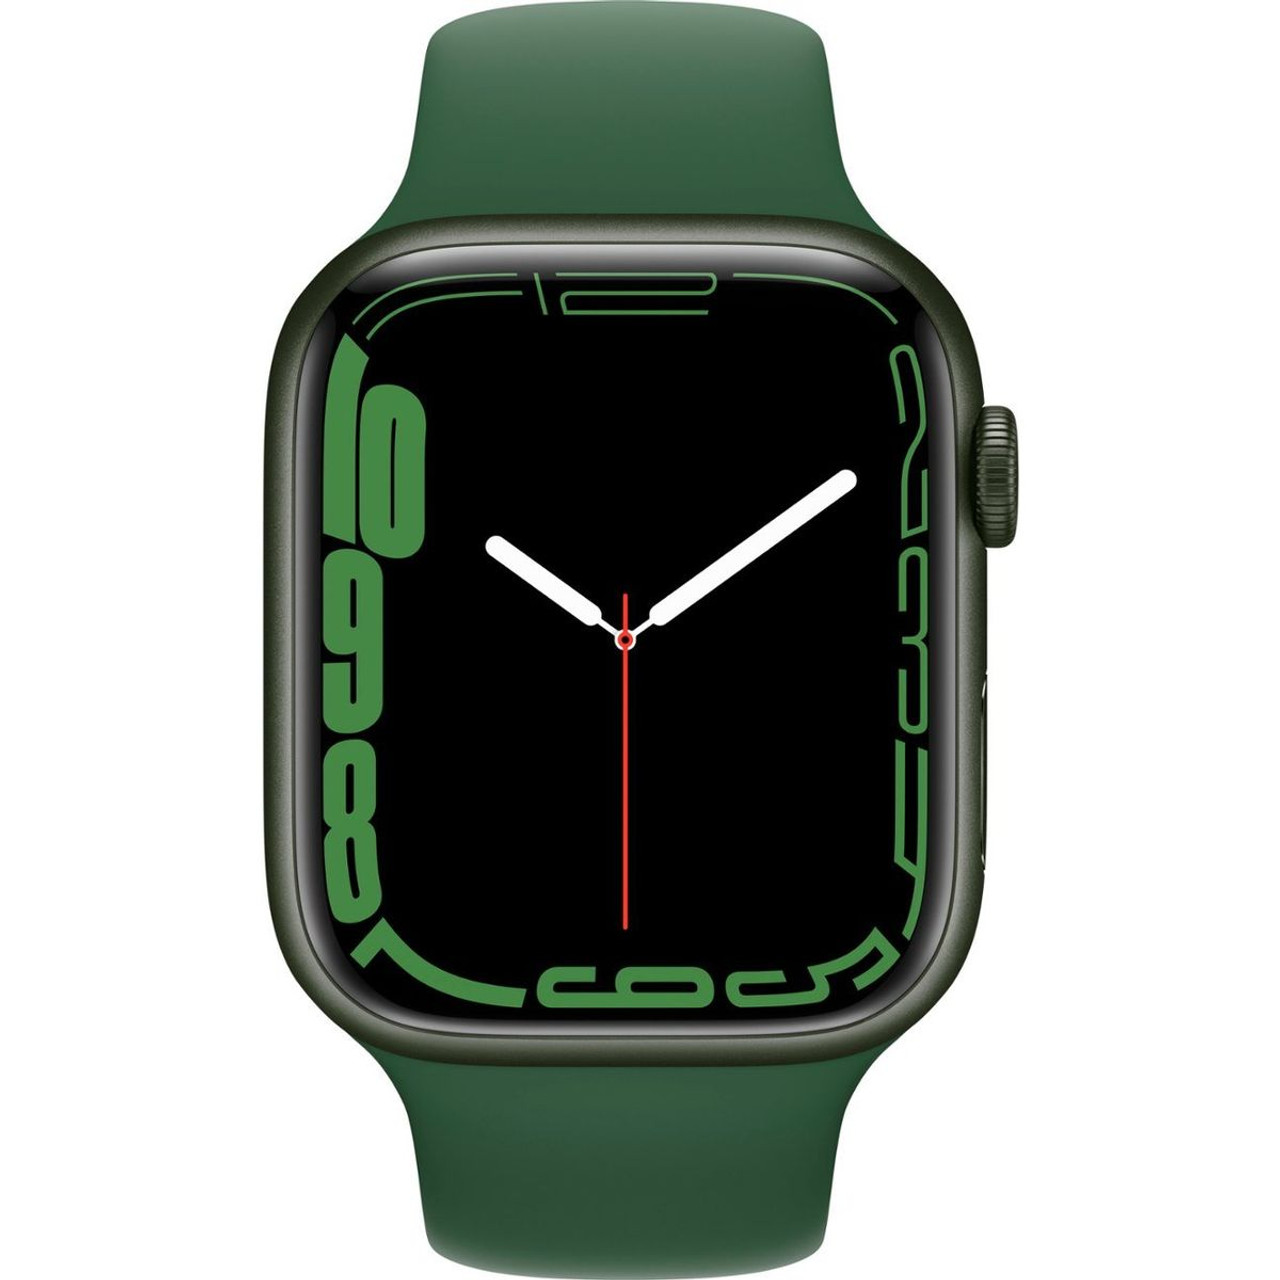 Apple Watch Series 7 with Green Aluminum Case  product image